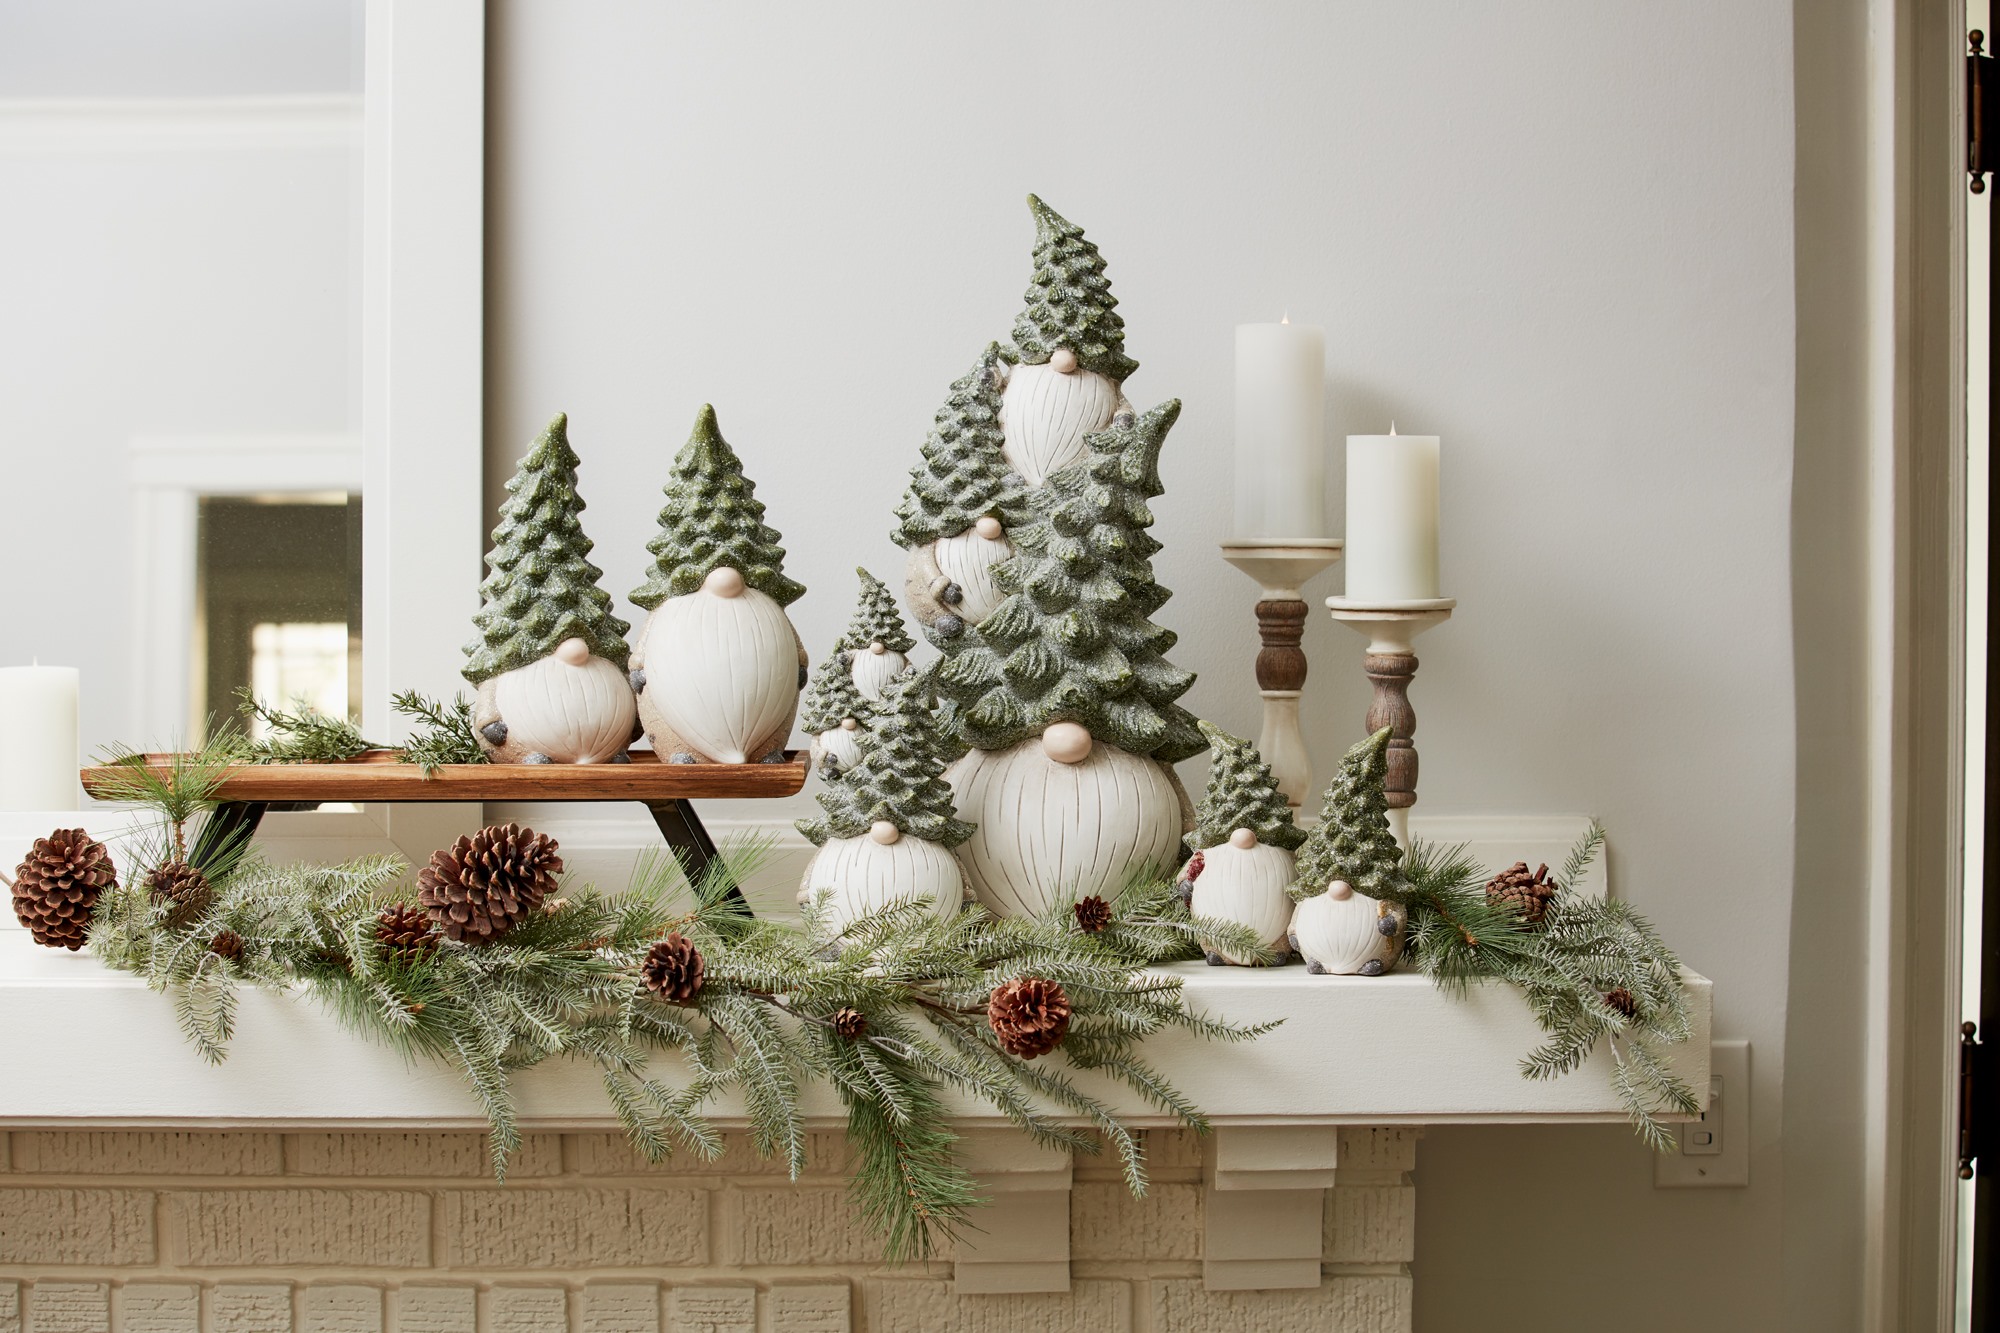 Make Christmas Easy: Browse Our Hand Selected Themes That Make Decorating a Breeze!